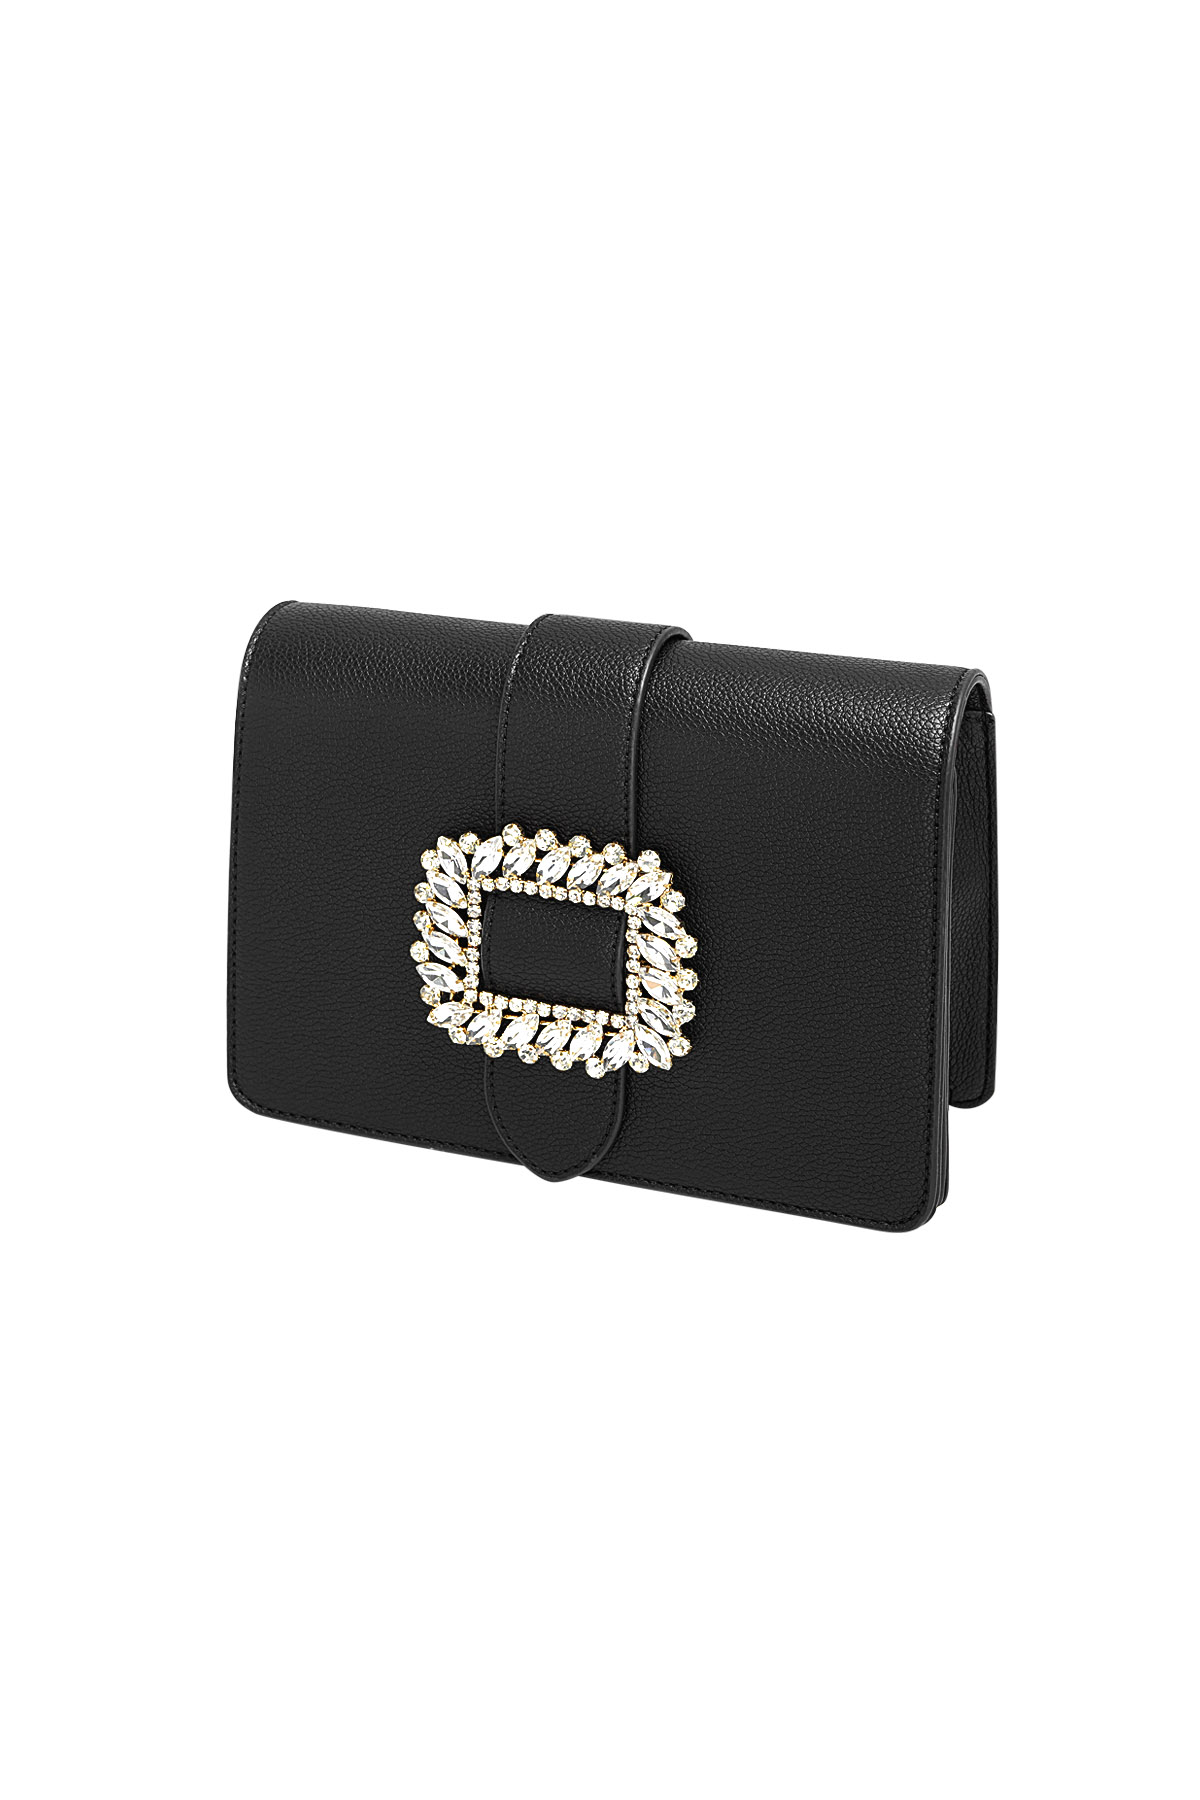 Bag buckle classy - black h5 Picture3